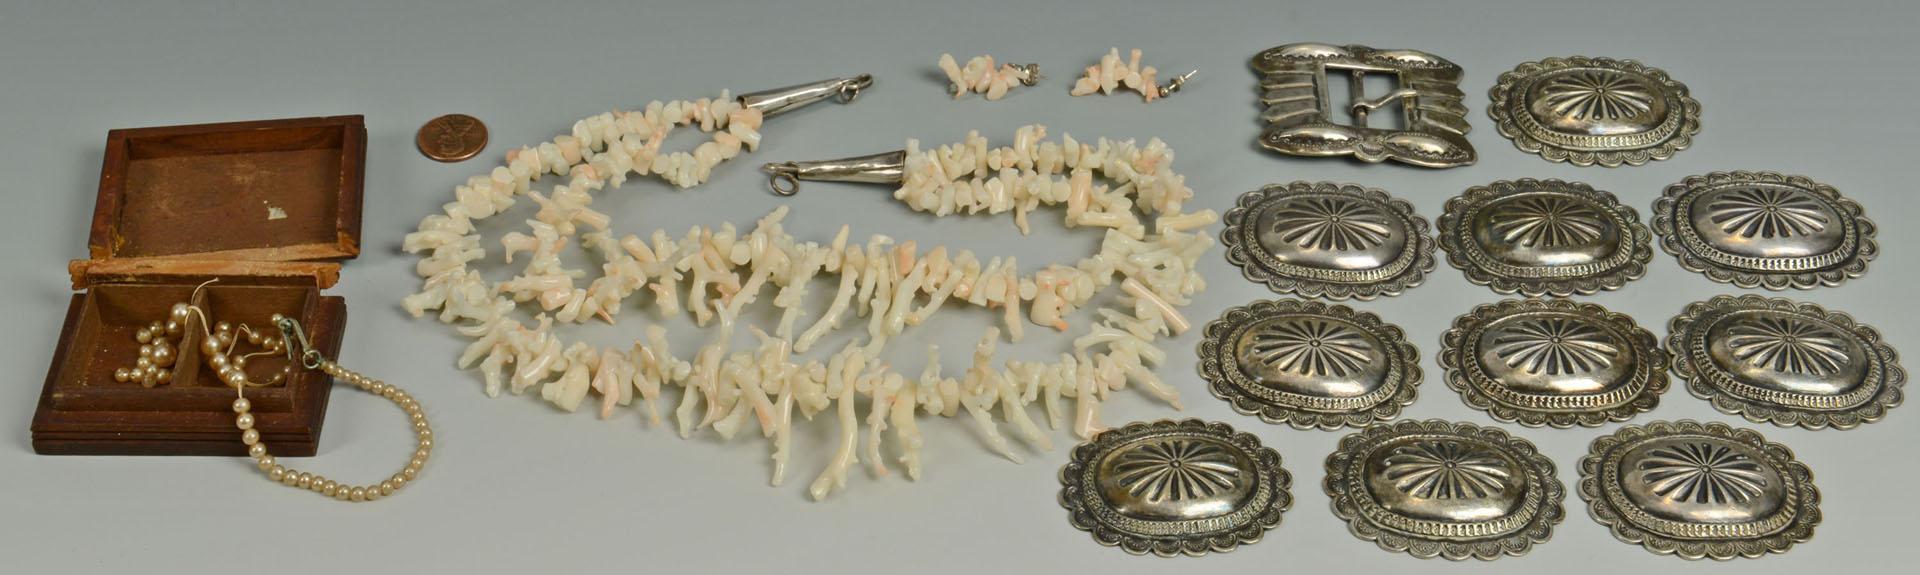 Lot 561: Navajo Concha Belt and coral necklace